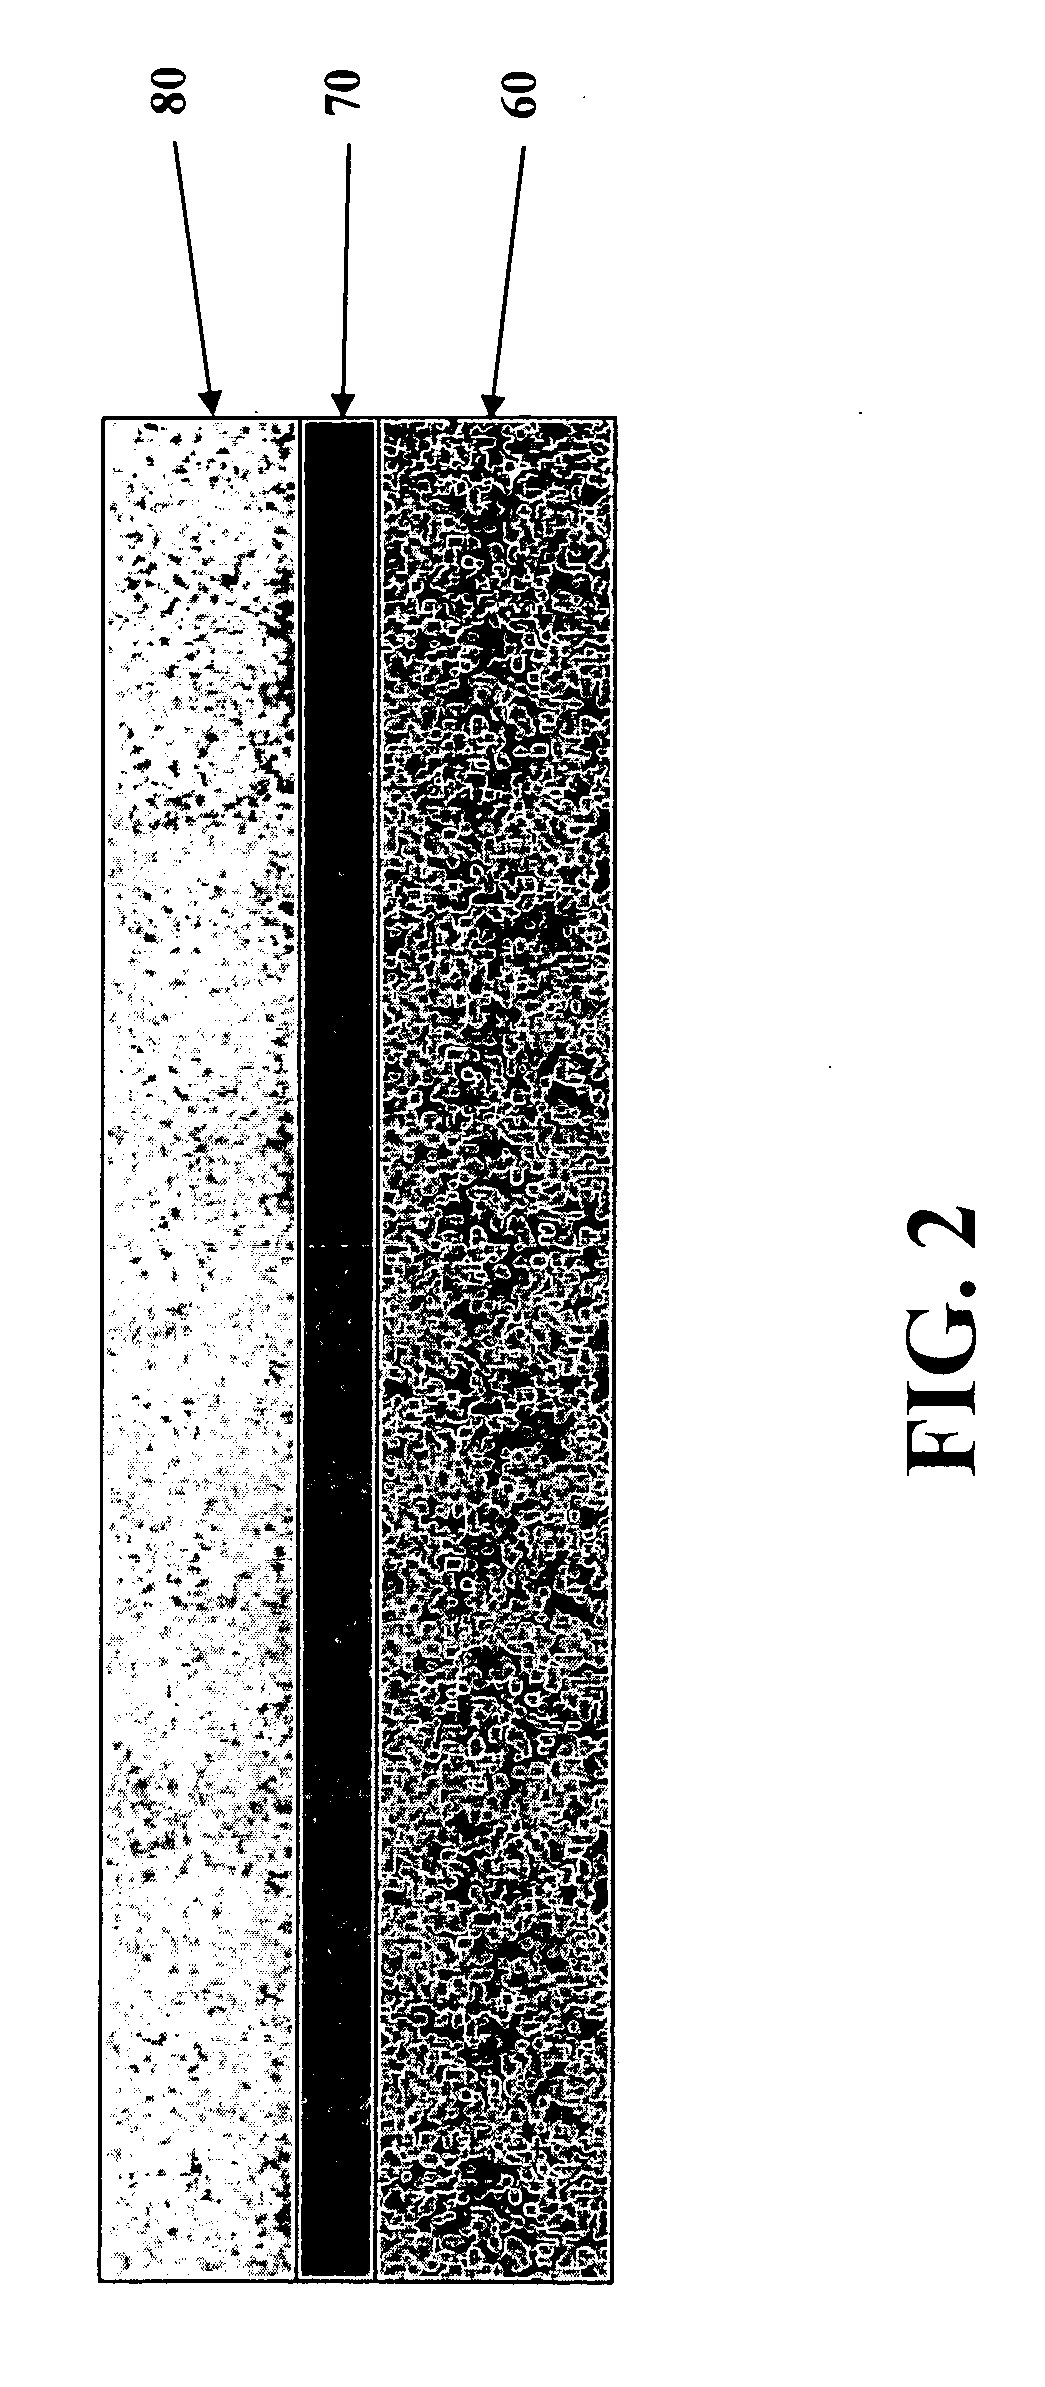 Noise-attenuating laminate composite wallboard panel and methods for manufacturing same